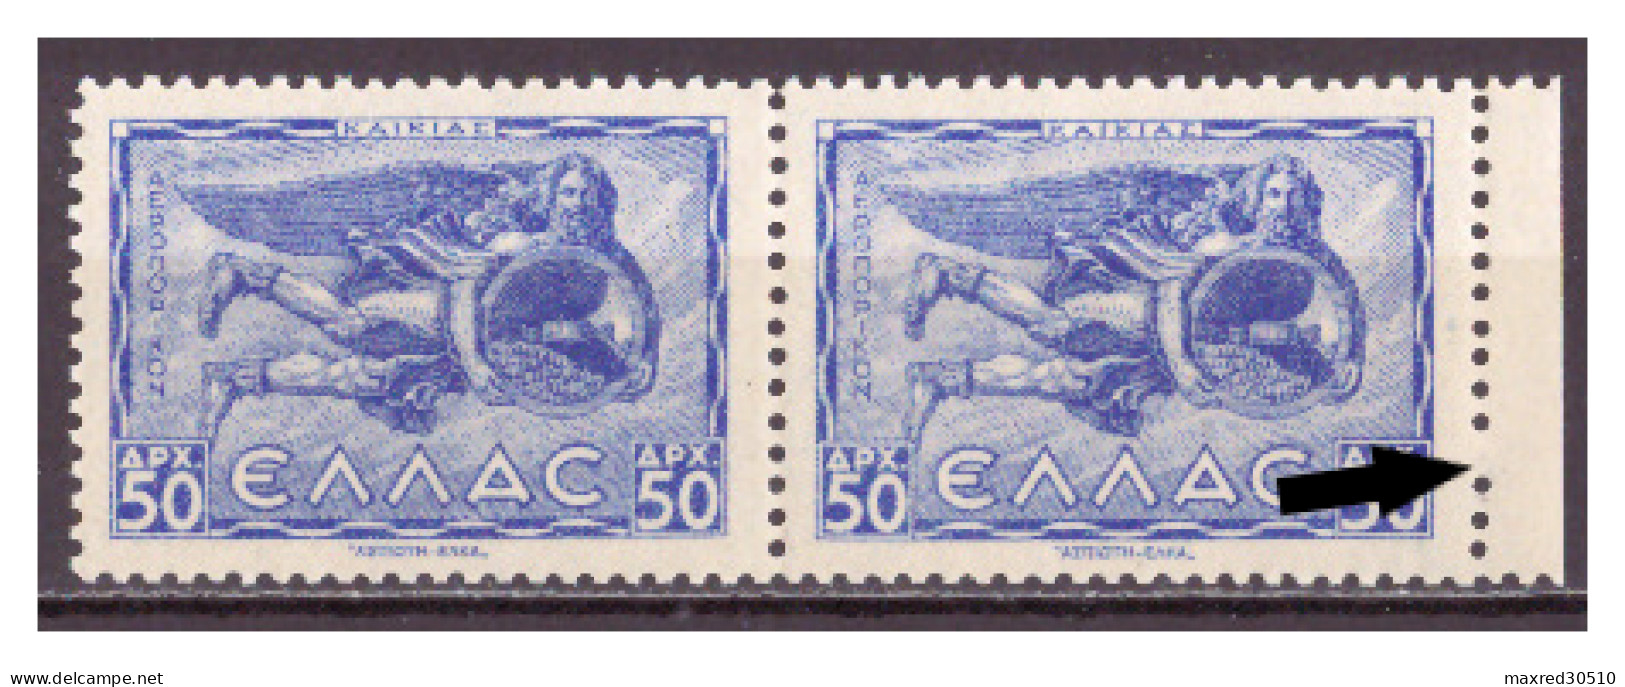 GREECE 1943 AIRPOST ISSUE HORIZONTAL PAIR 50DR. OF "WINDS II" WITH PRINTING ERROR AT THE RIGHT PERFORATION SEE DESCRIBE - Variedades Y Curiosidades